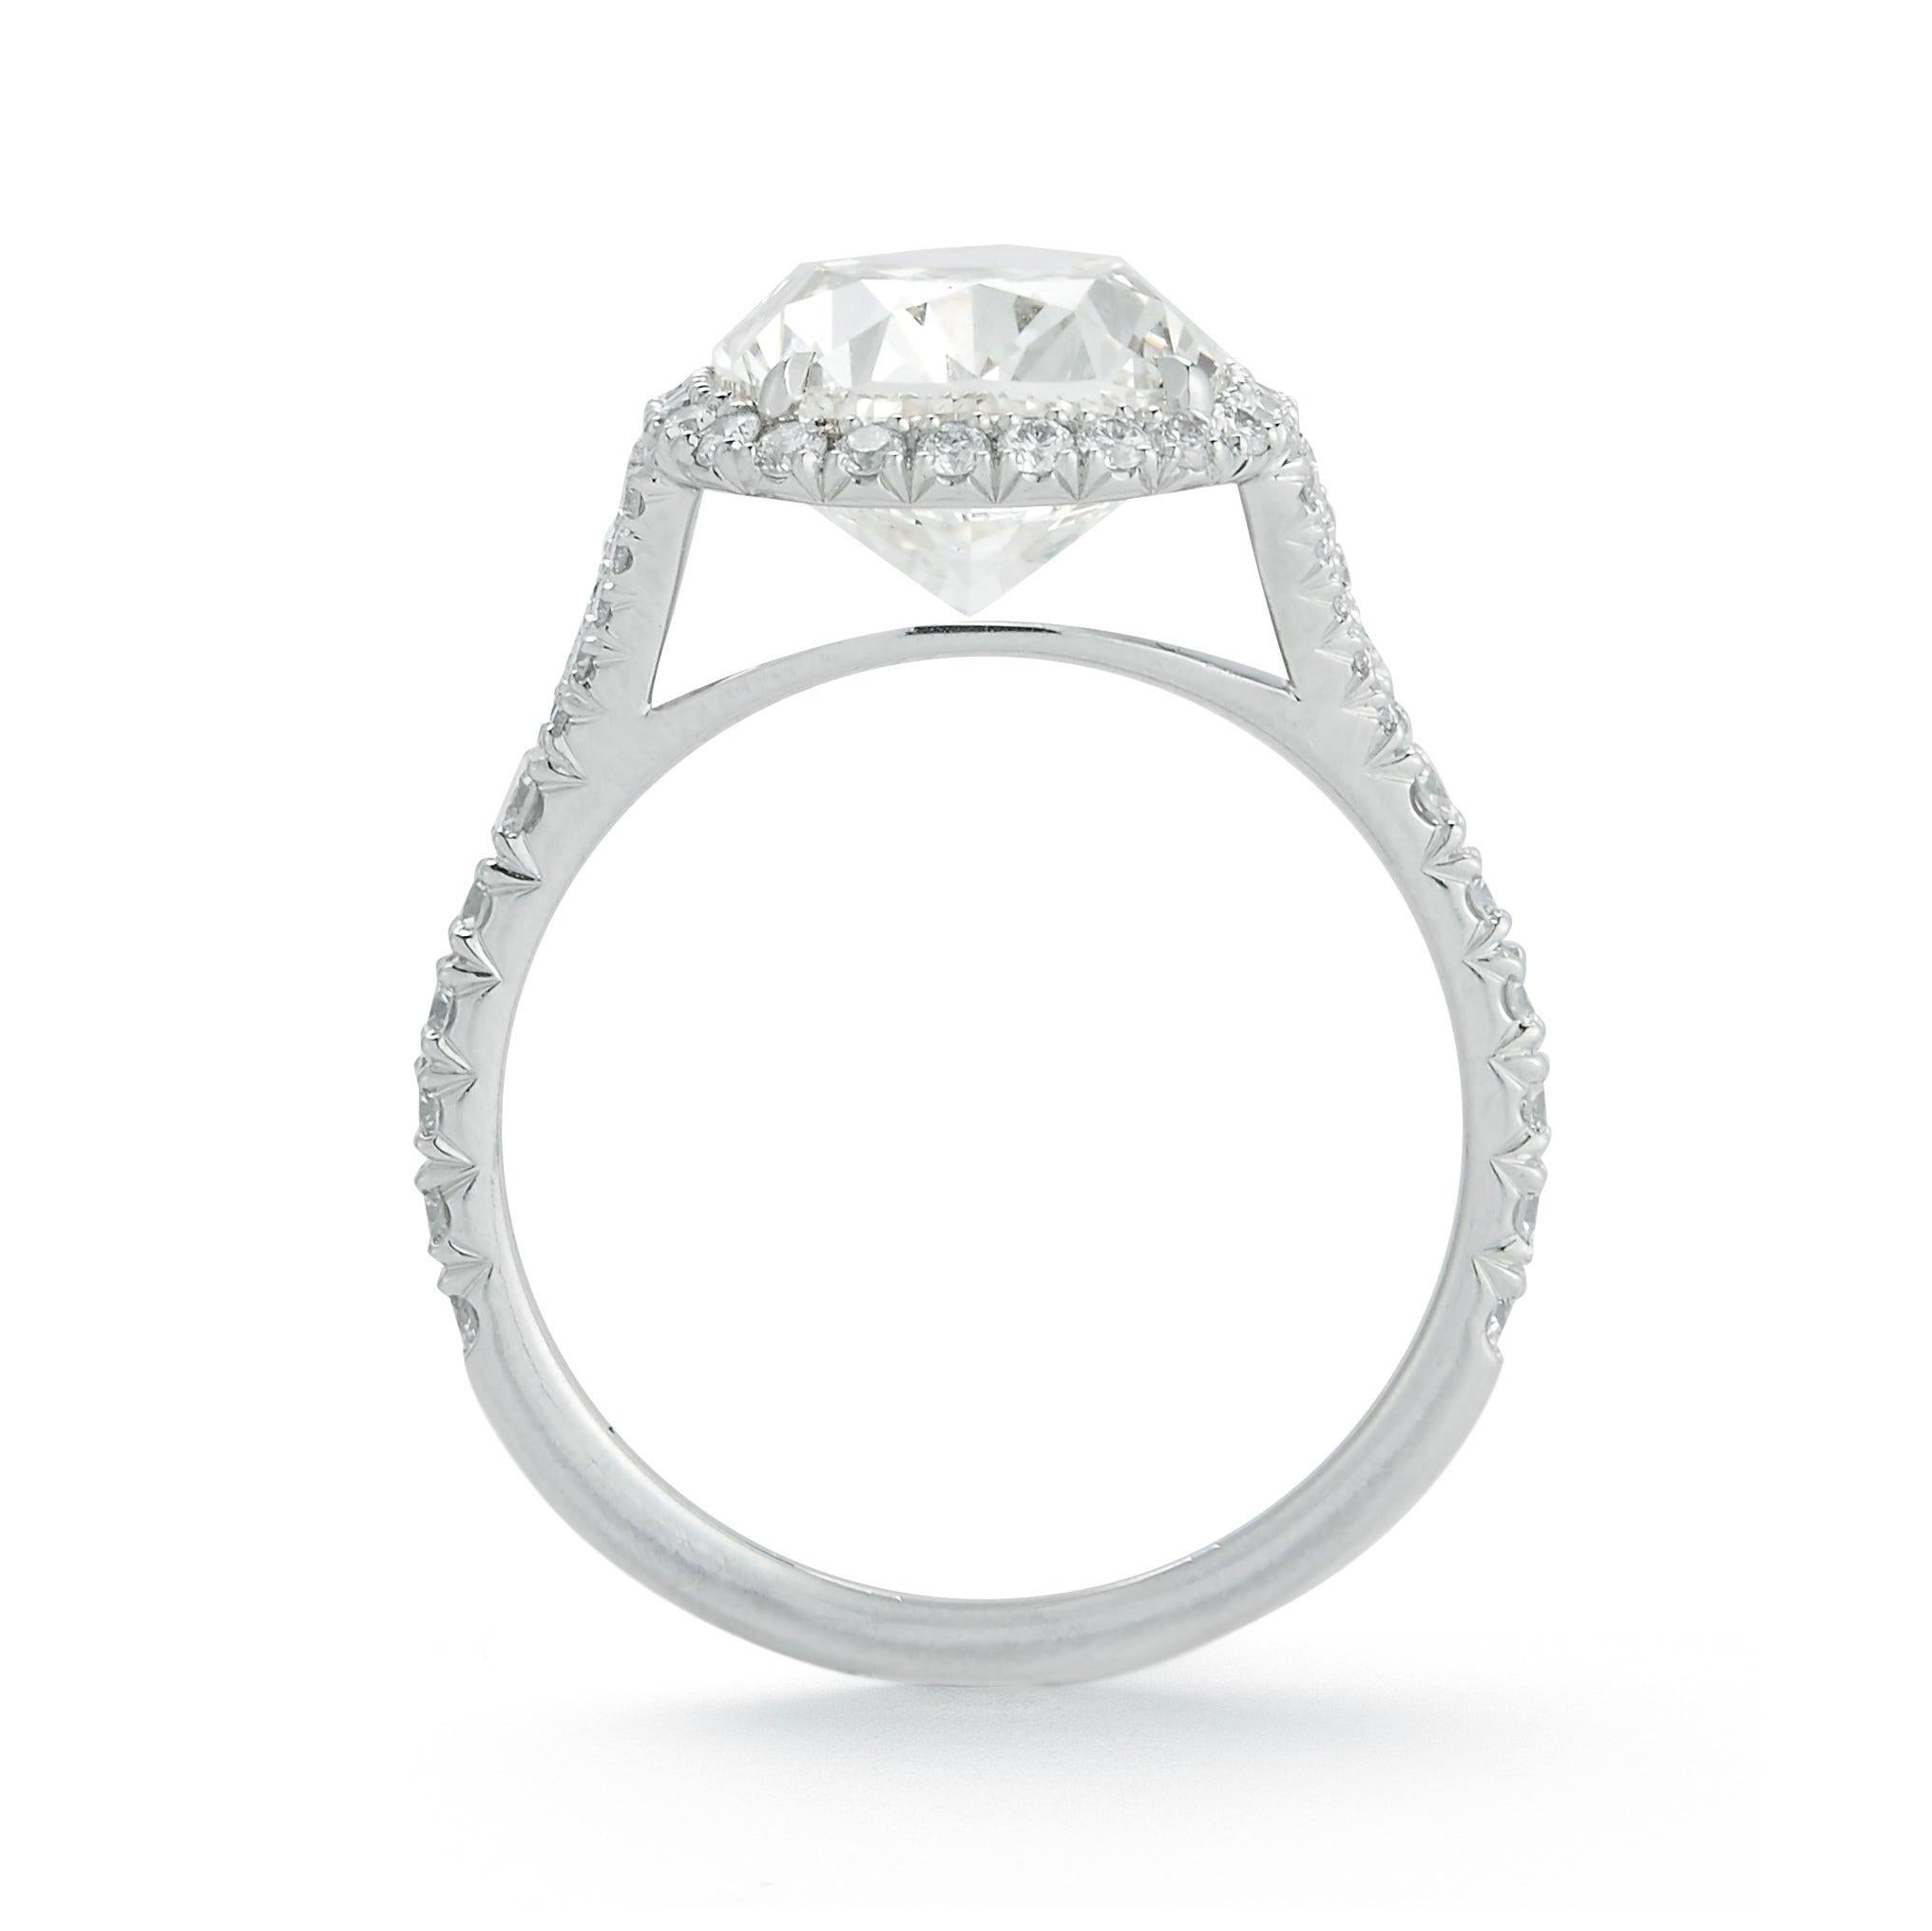  Kwiat 4.51 carat Cushion-Cut Diamond Ring In New Condition For Sale In New York, NY